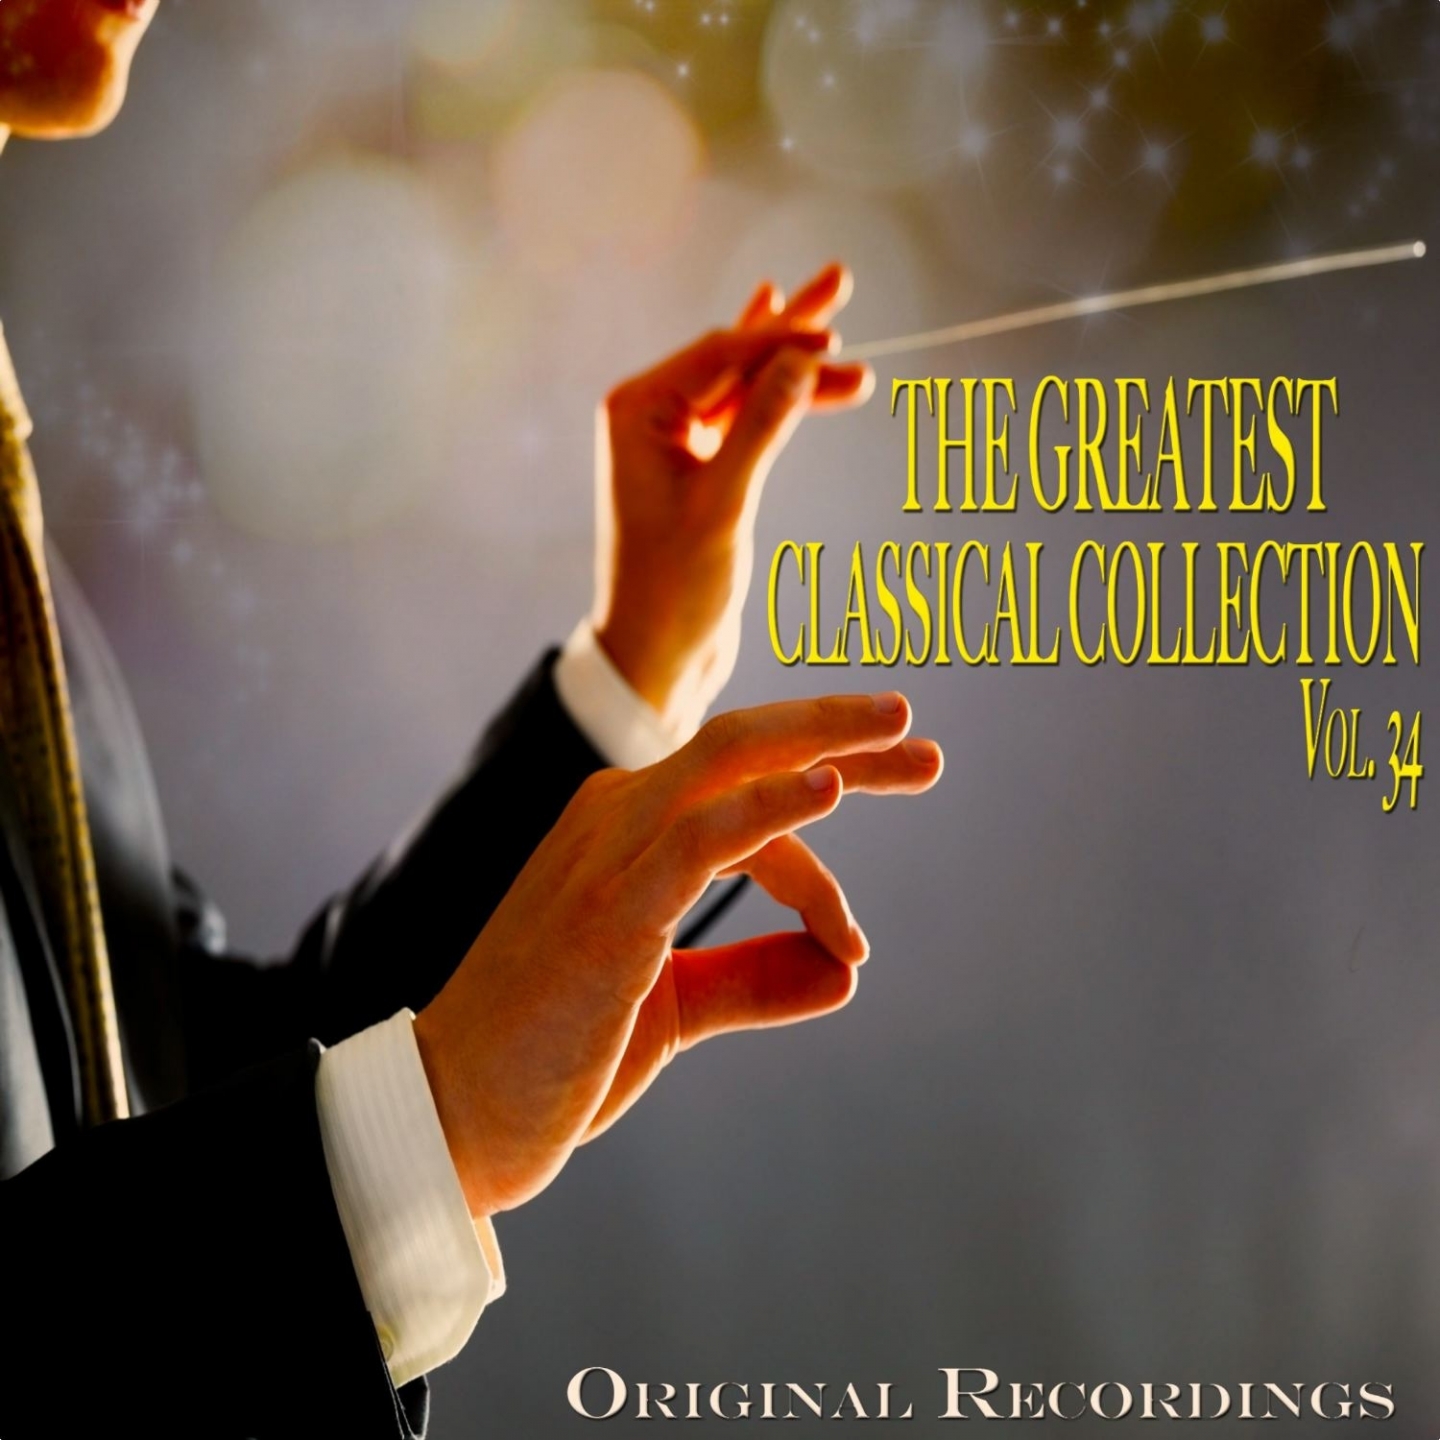 The Greatest Classical Collection Vol. 34